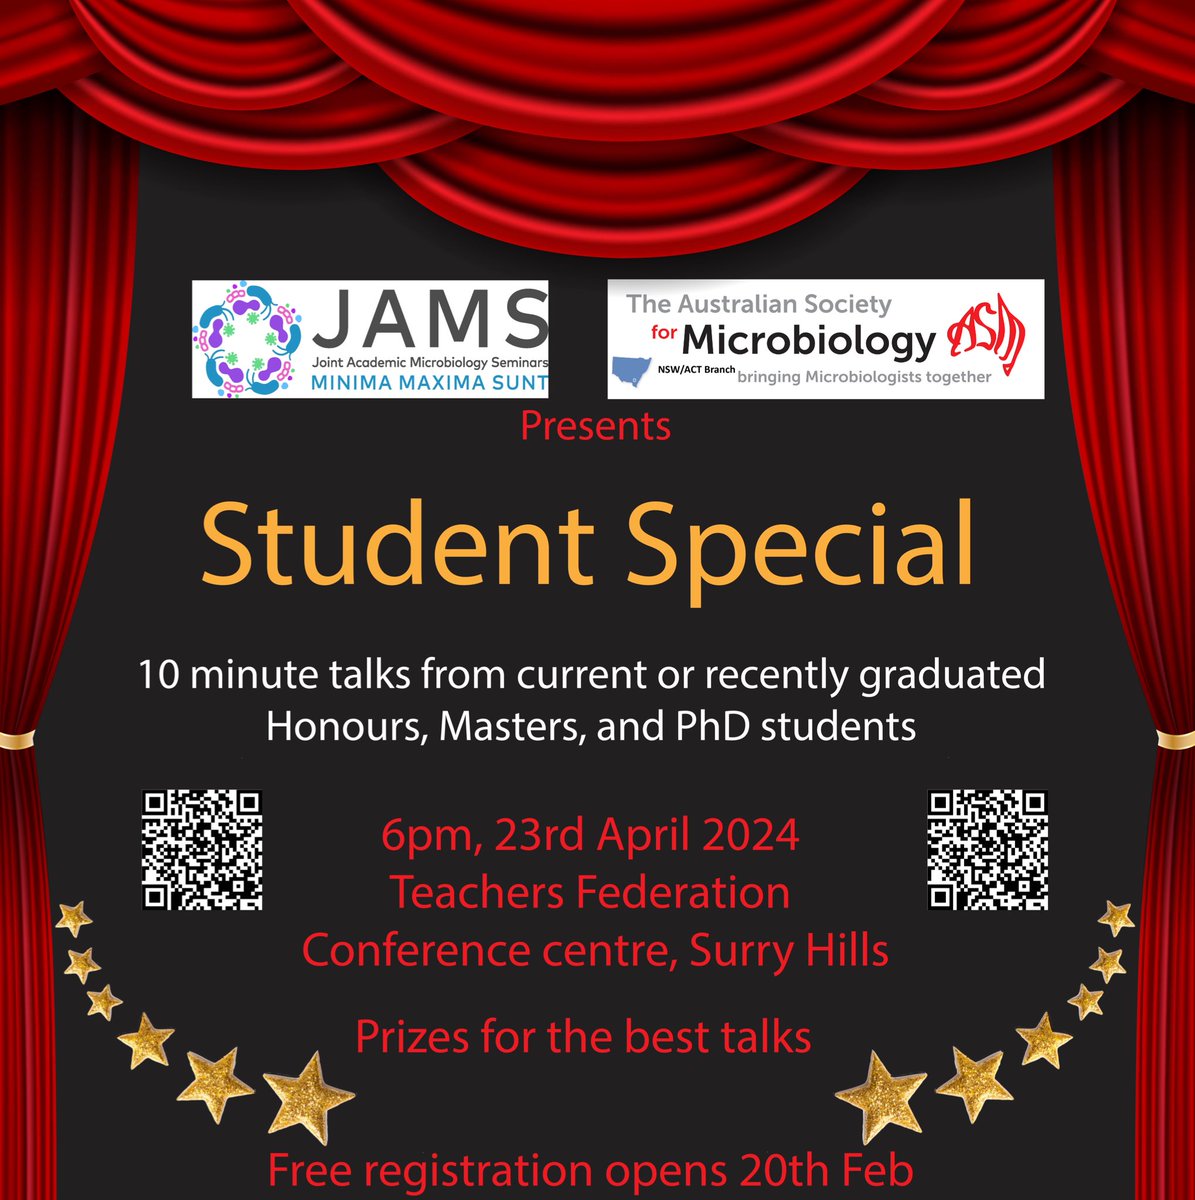 Exciting Collab ALERT‼️ ASM 🤝🏽 @jamsorgau Presents the Student Special! 🧫 10min Student Talks,🥇for Best Talks 🧫 6pm, 23rd April’24 🧫 NSW Teachers Fed, Surry Hills 🧫 Catered Event 🚨 Abstracts Due: 7th April 👉🏽Abstracts & FREE Rego: events.humanitix.com/2024-jams-x-as…